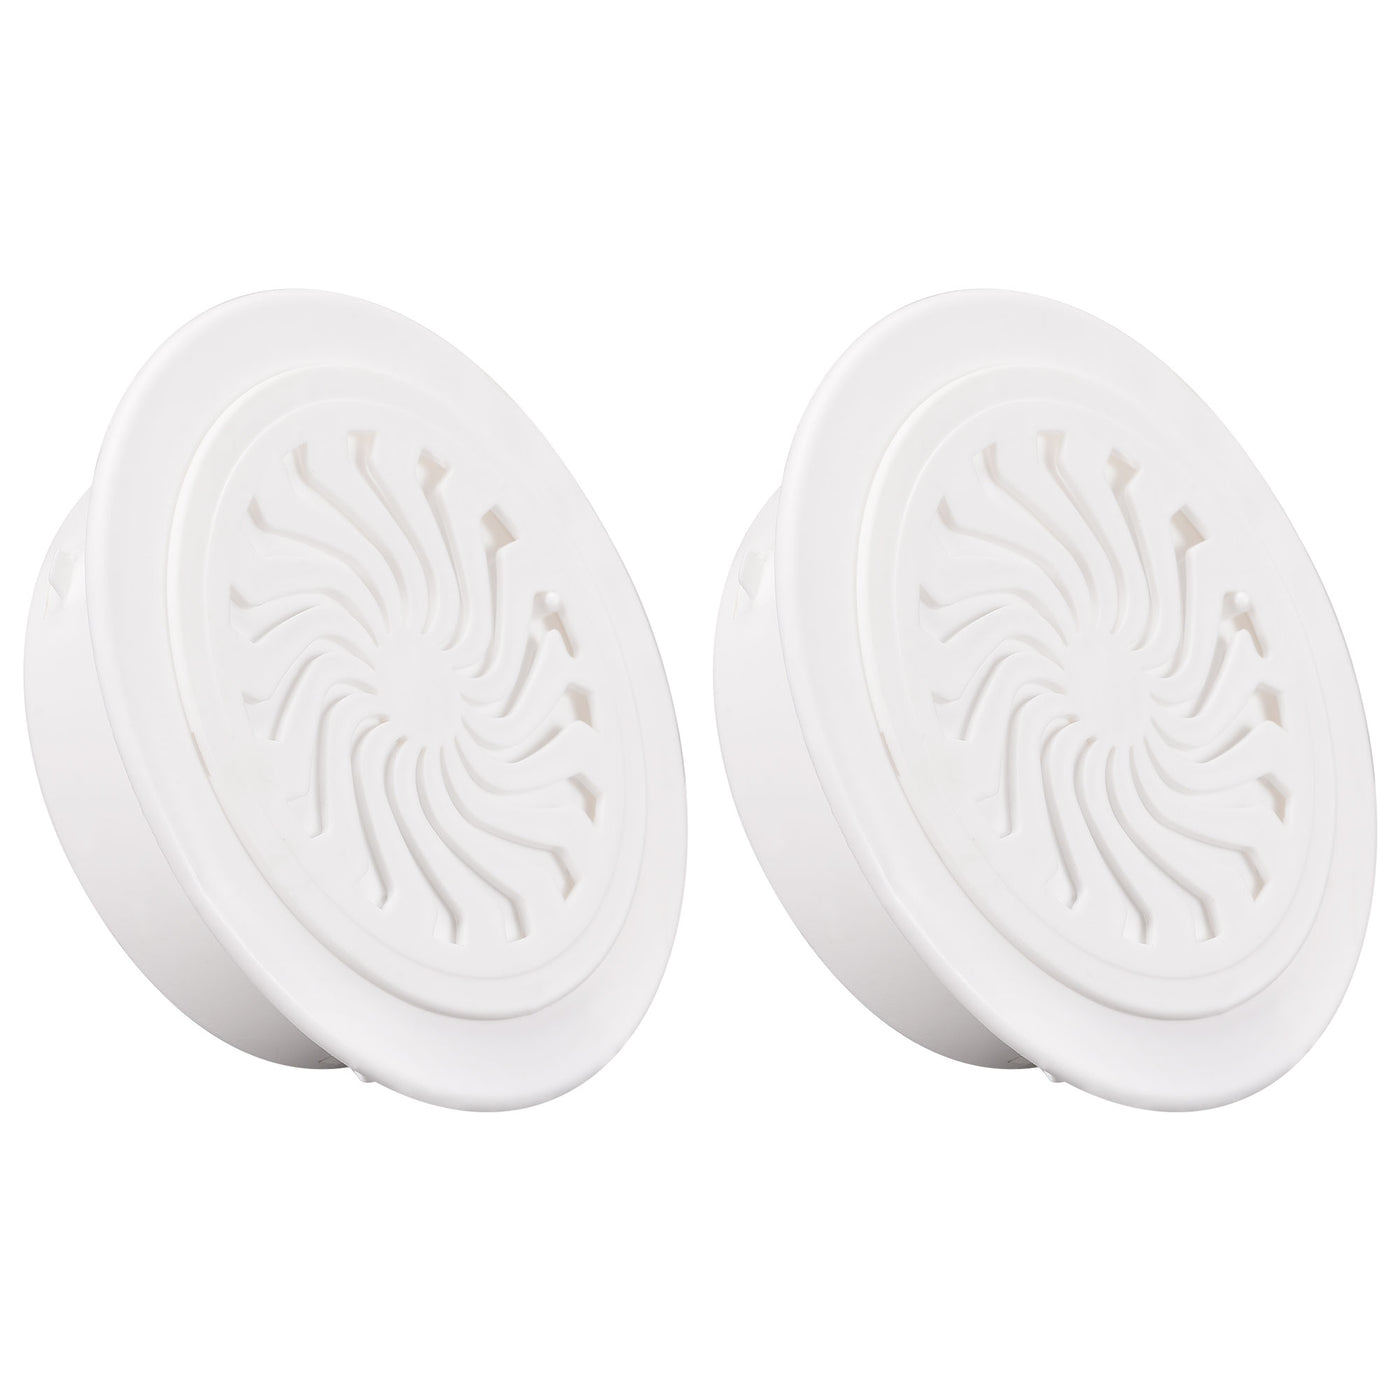 uxcell Uxcell Round Vent Cover Plastic Adjustable Air Vent Cover